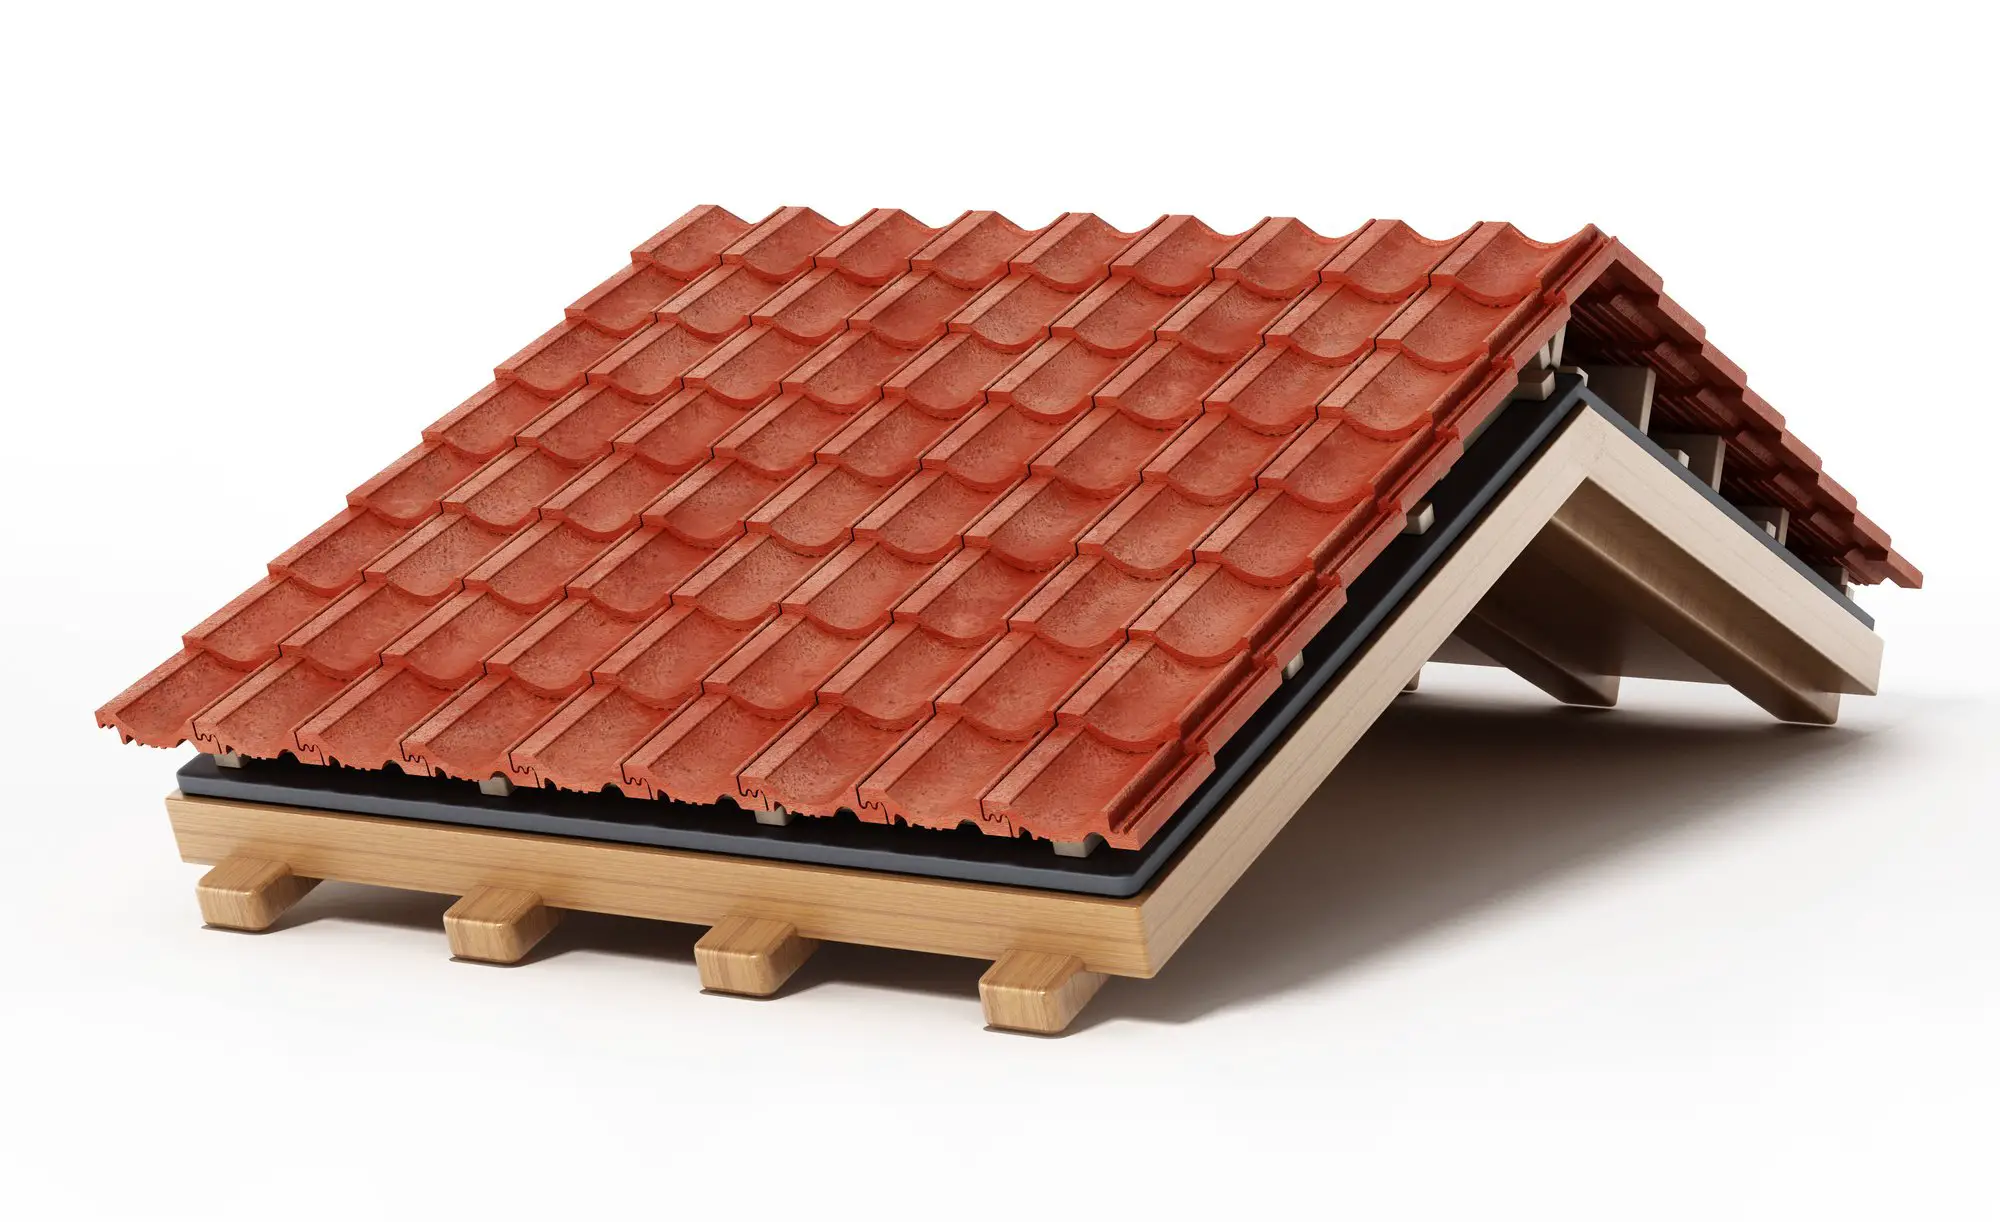 The Most Energy Efficient Types of Roof Shingles